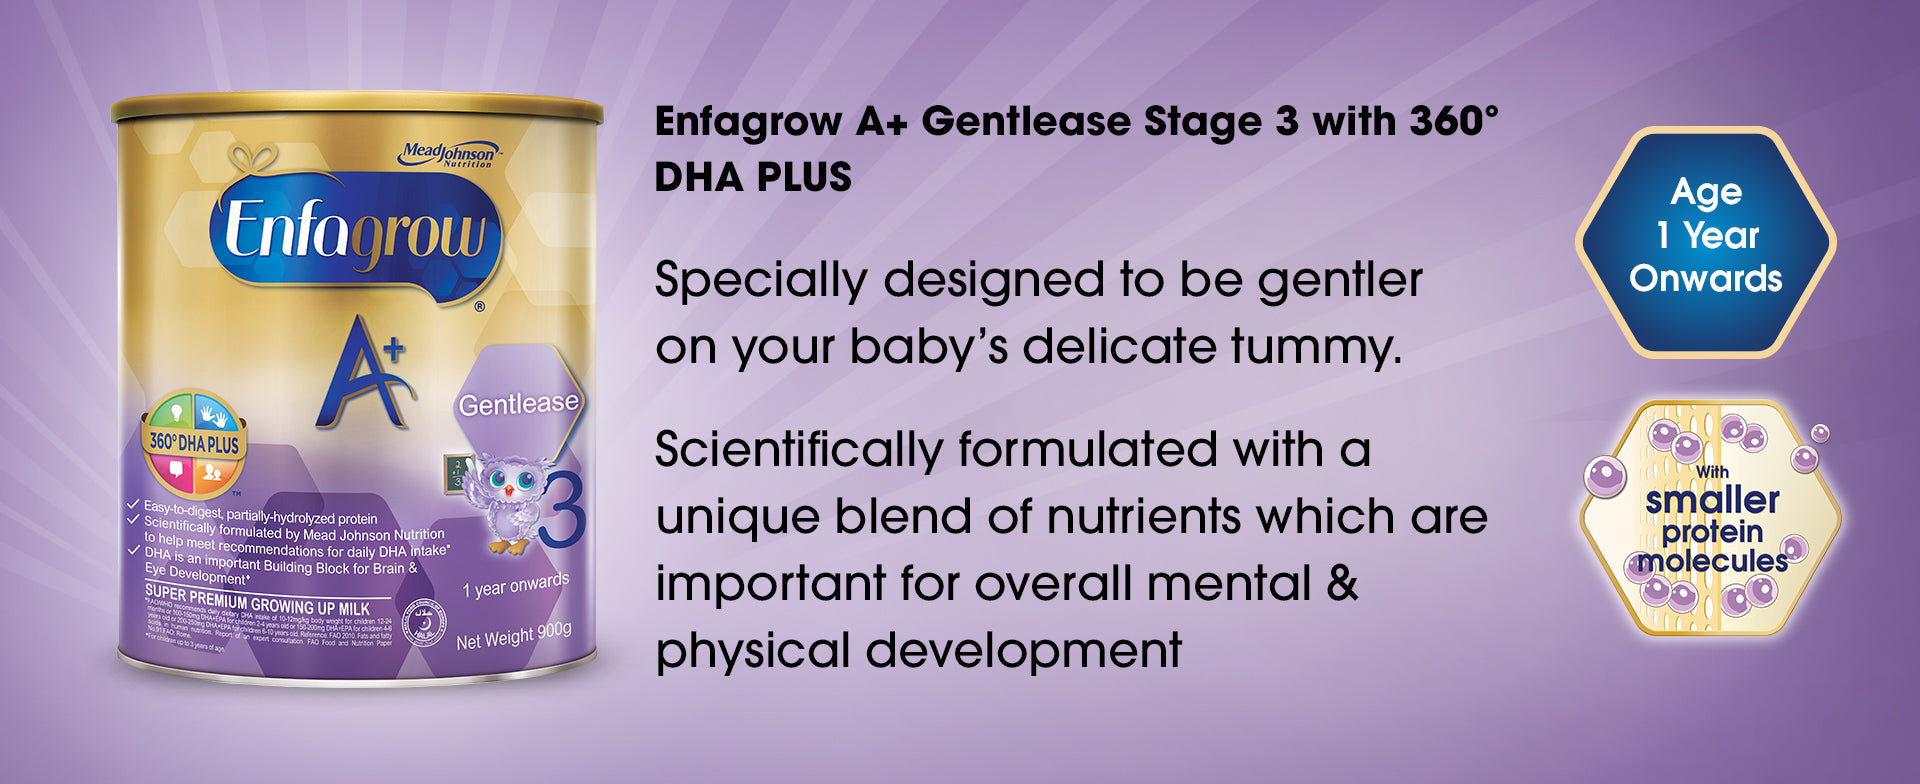 Enfagrow A+ Gentlease Stage 3 with 360 degrees DHA PLUS - a product banner image with basic information